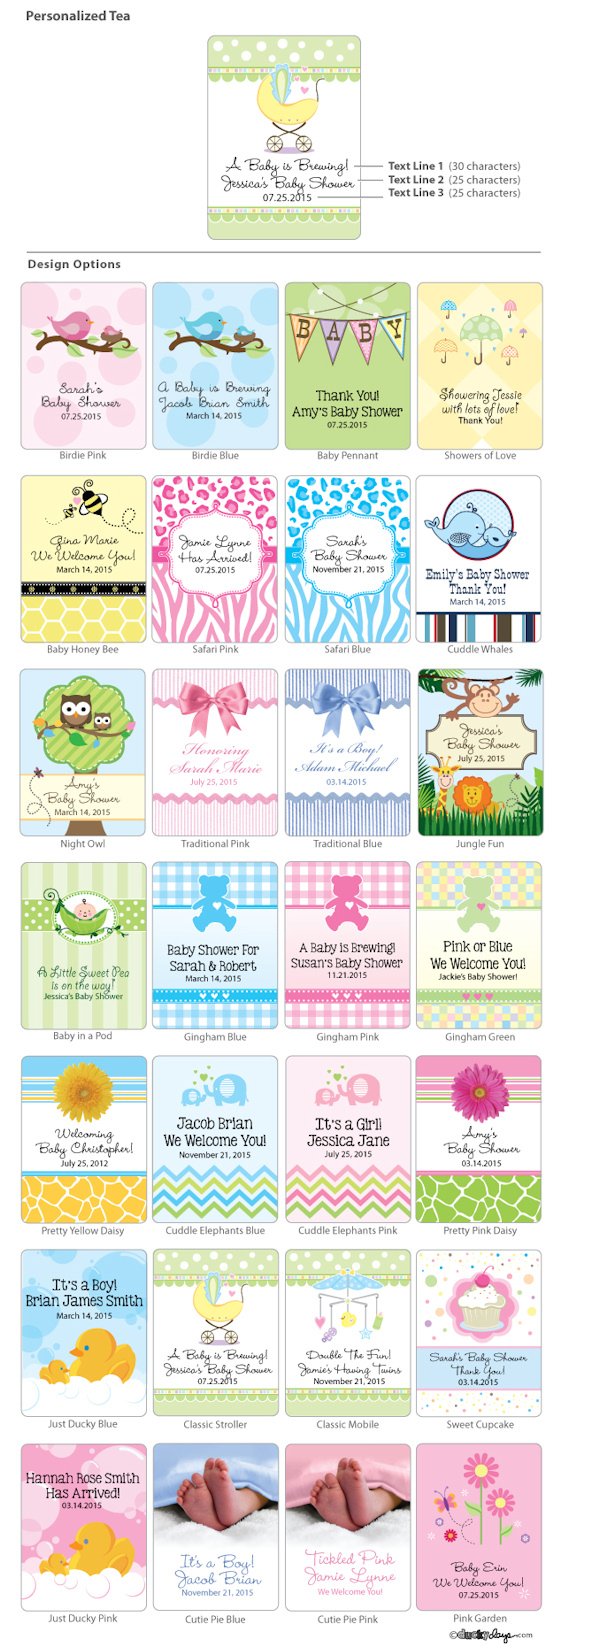 Personalized Baby Tea Favor (Many Designs Available) - Alternate Image 2 | My Wedding Favors